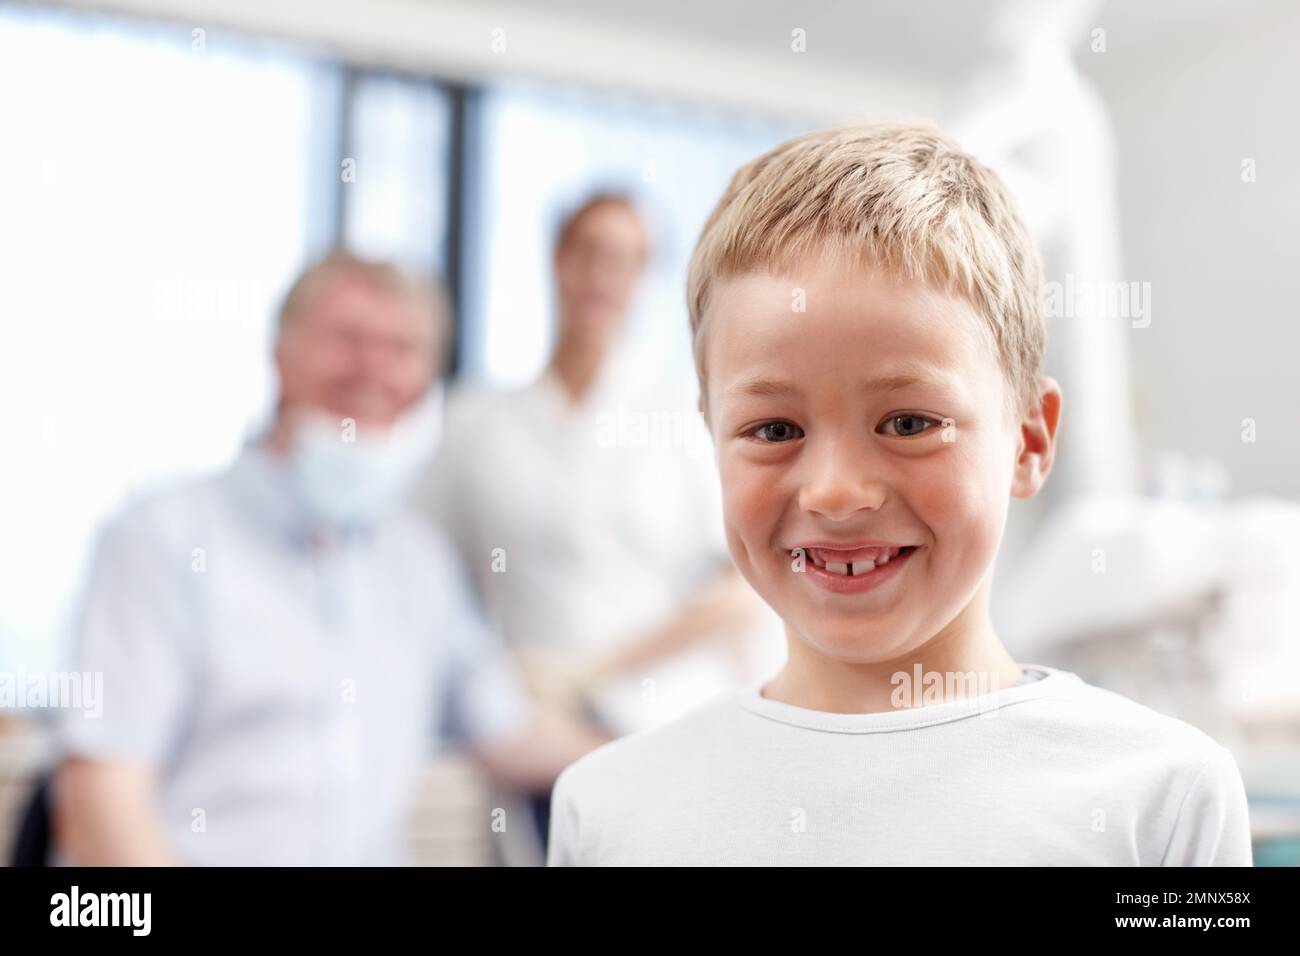 Boy with healthy teeth. Portrait of adorable young boy smiling with dentists in background. Stock Photo